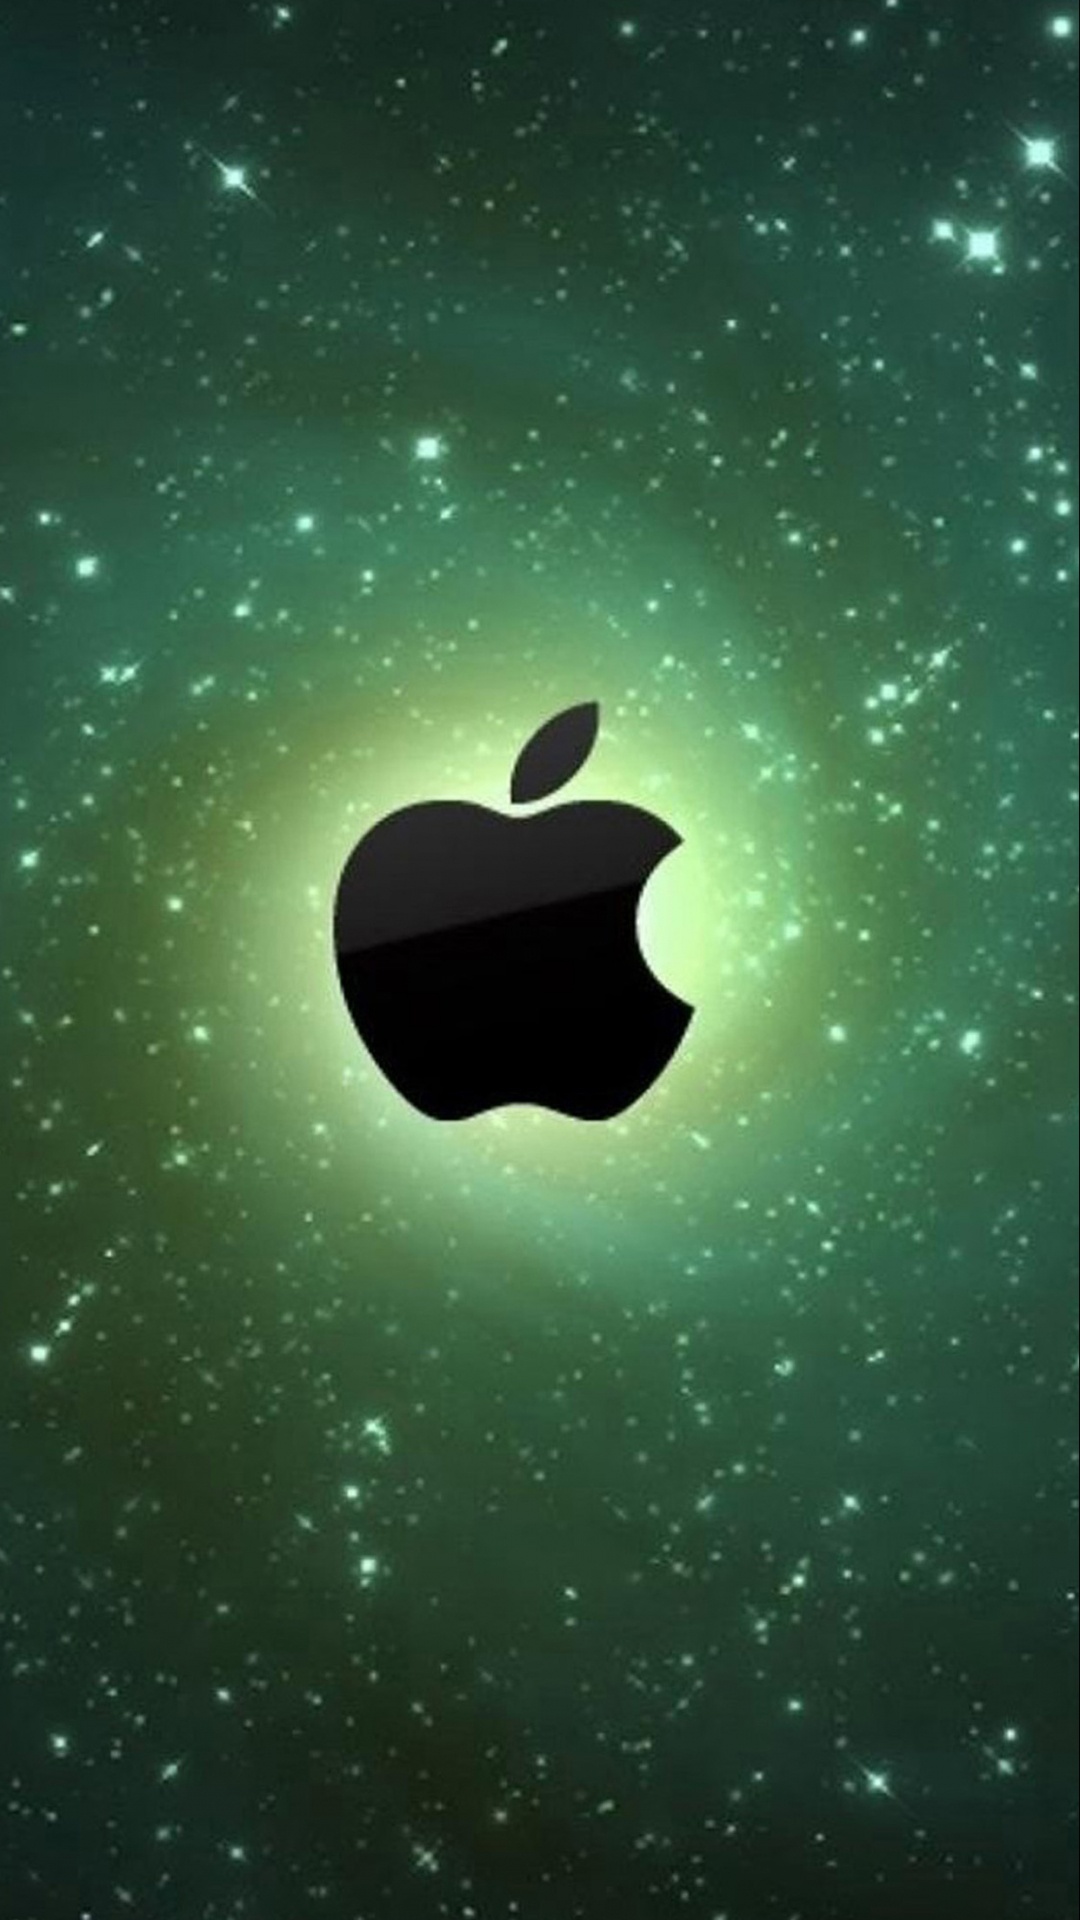 Apple, Graphics, Green, Atmosphere, Illustration. Wallpaper in 1080x1920 Resolution